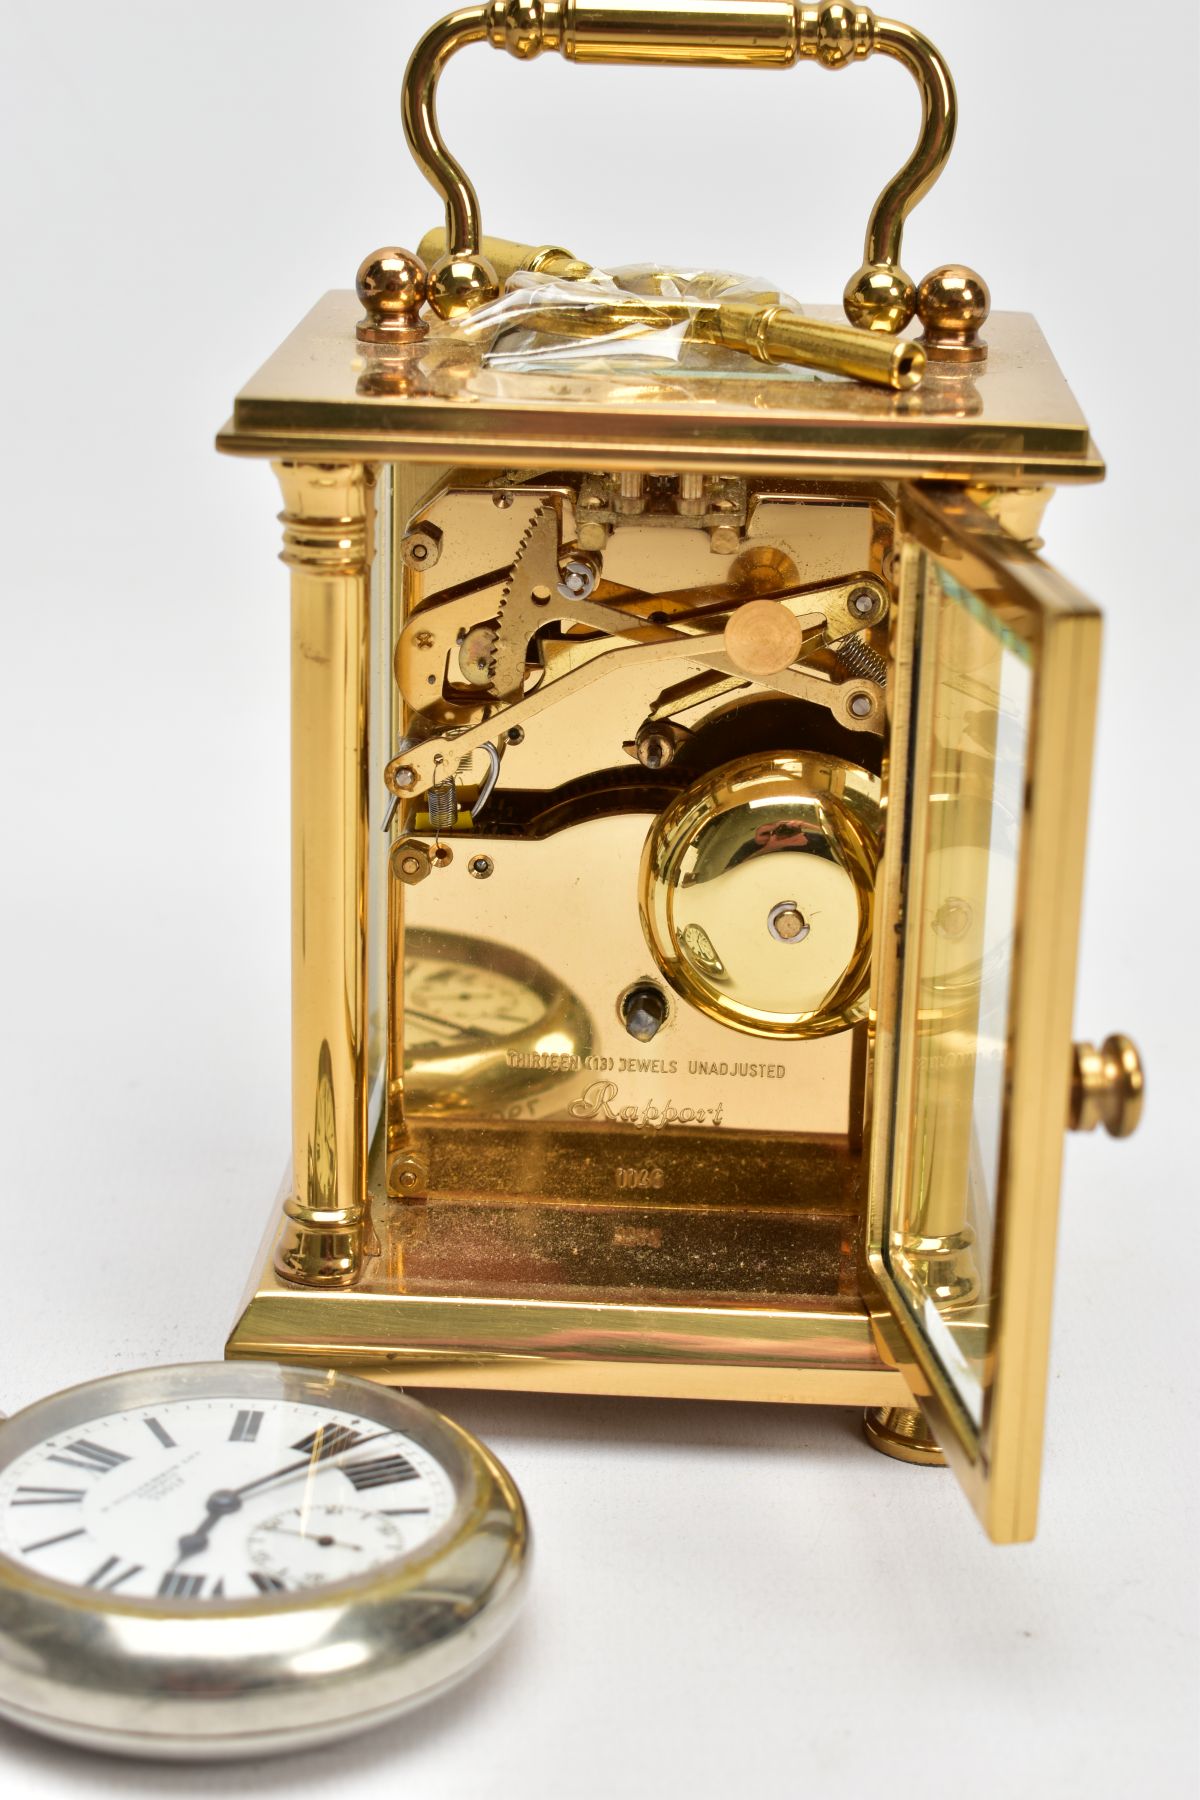 A BRASS CARRIAGE CLOCK AND A MILITARY POCKET WATCH, a white enamel face with black Roman numerals, - Image 5 of 7